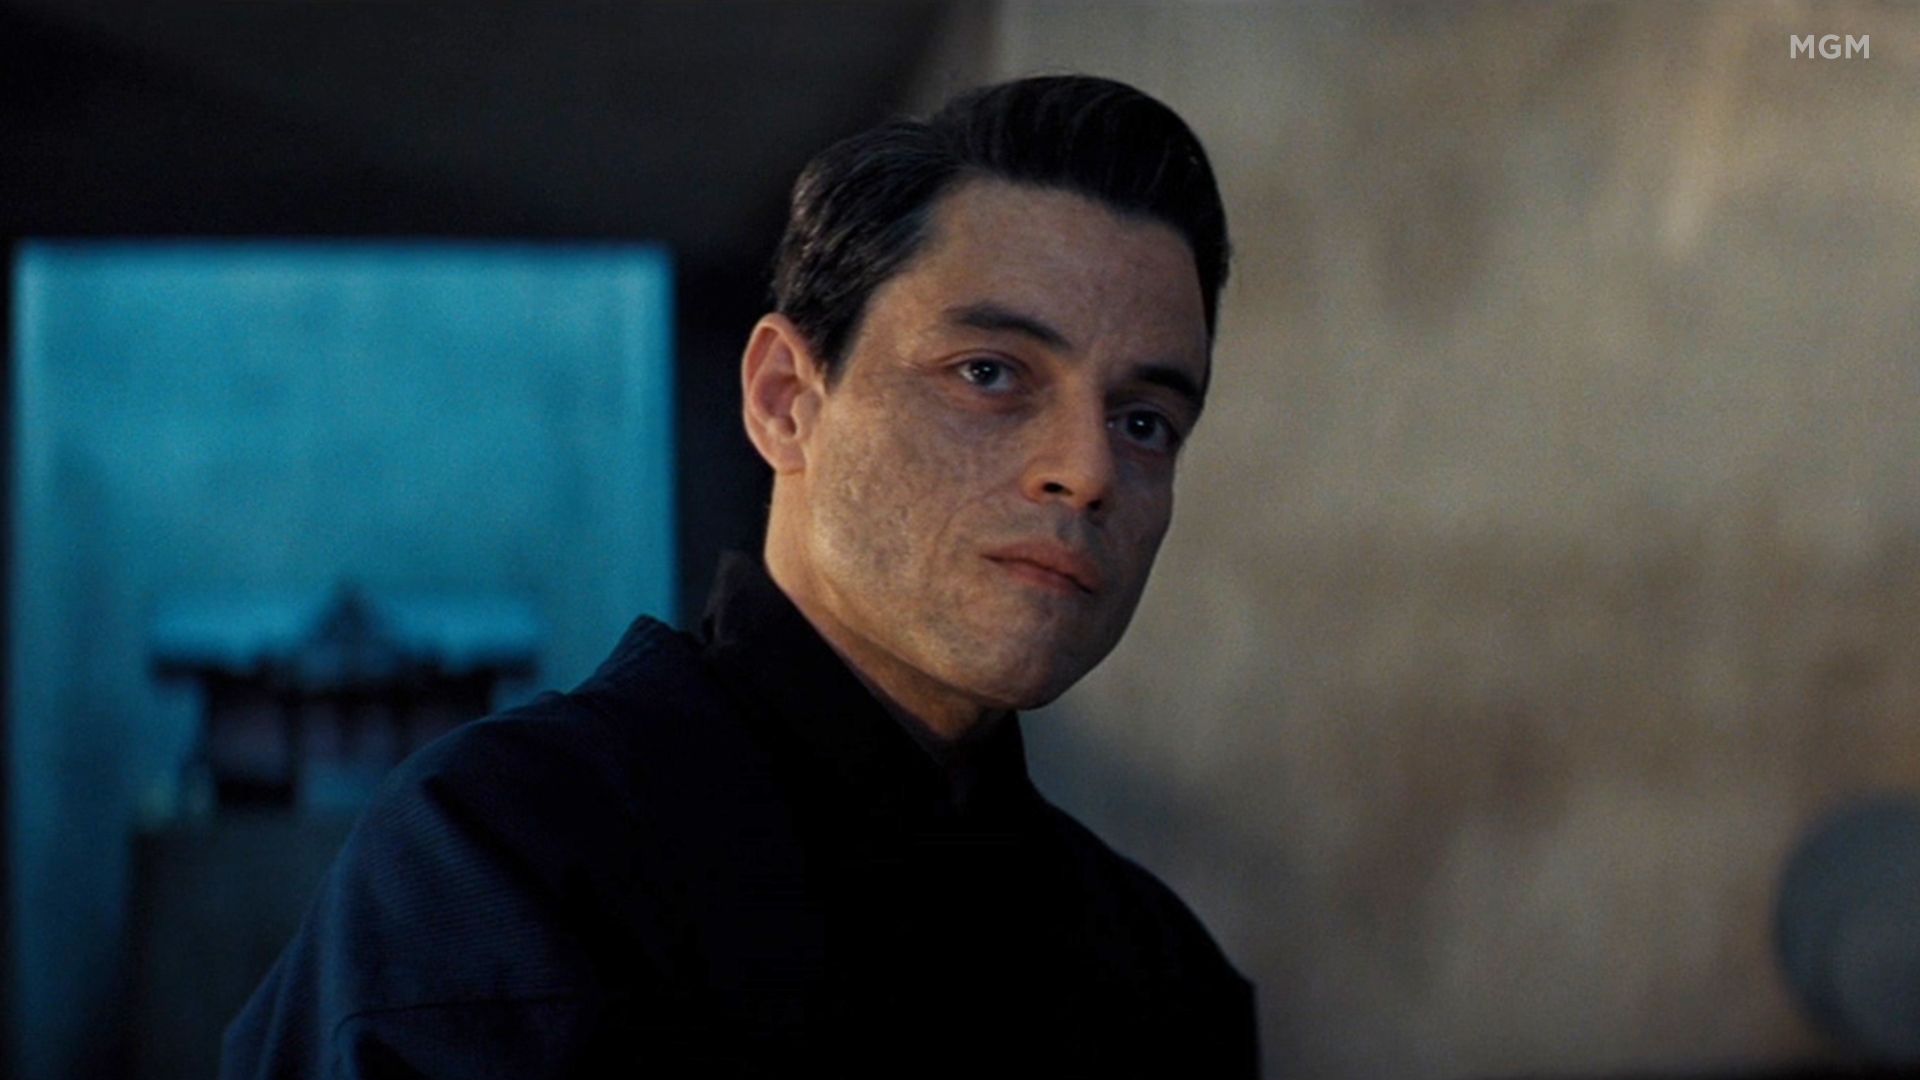 Rami Malek may be the best 'Bond' villain yet in 'No Time to Die